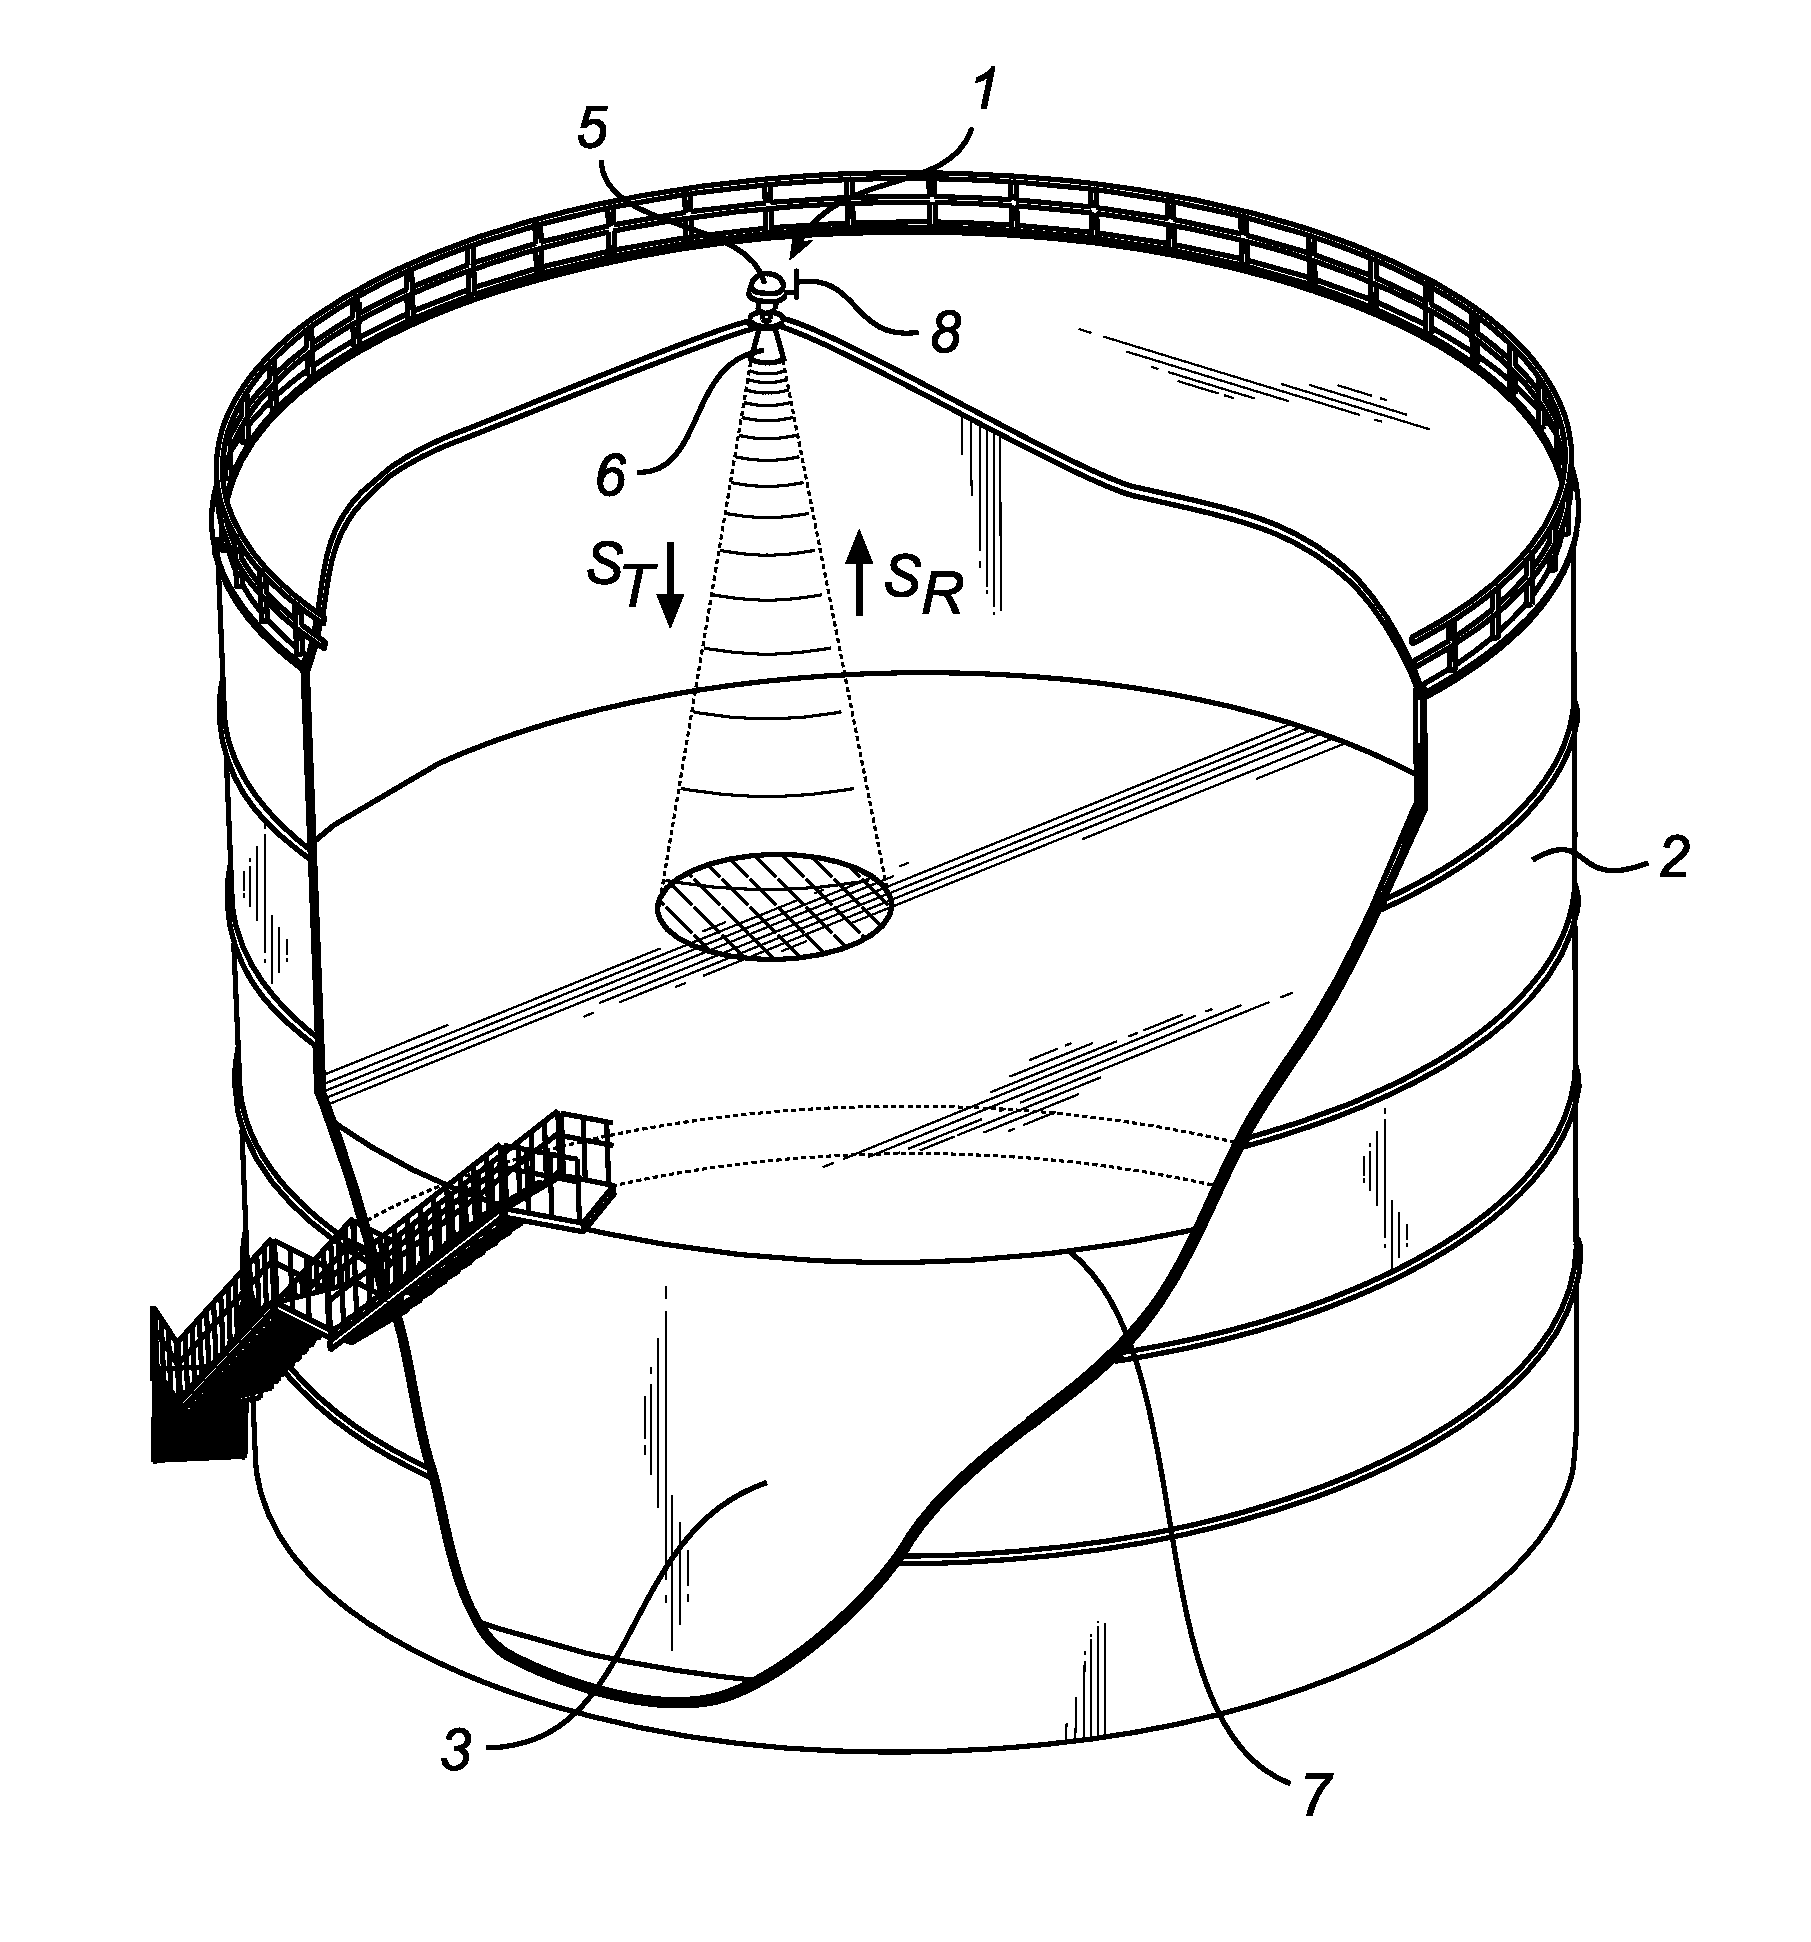 Pulsed level gauge system with temperature-based control of pulse repetition frequency